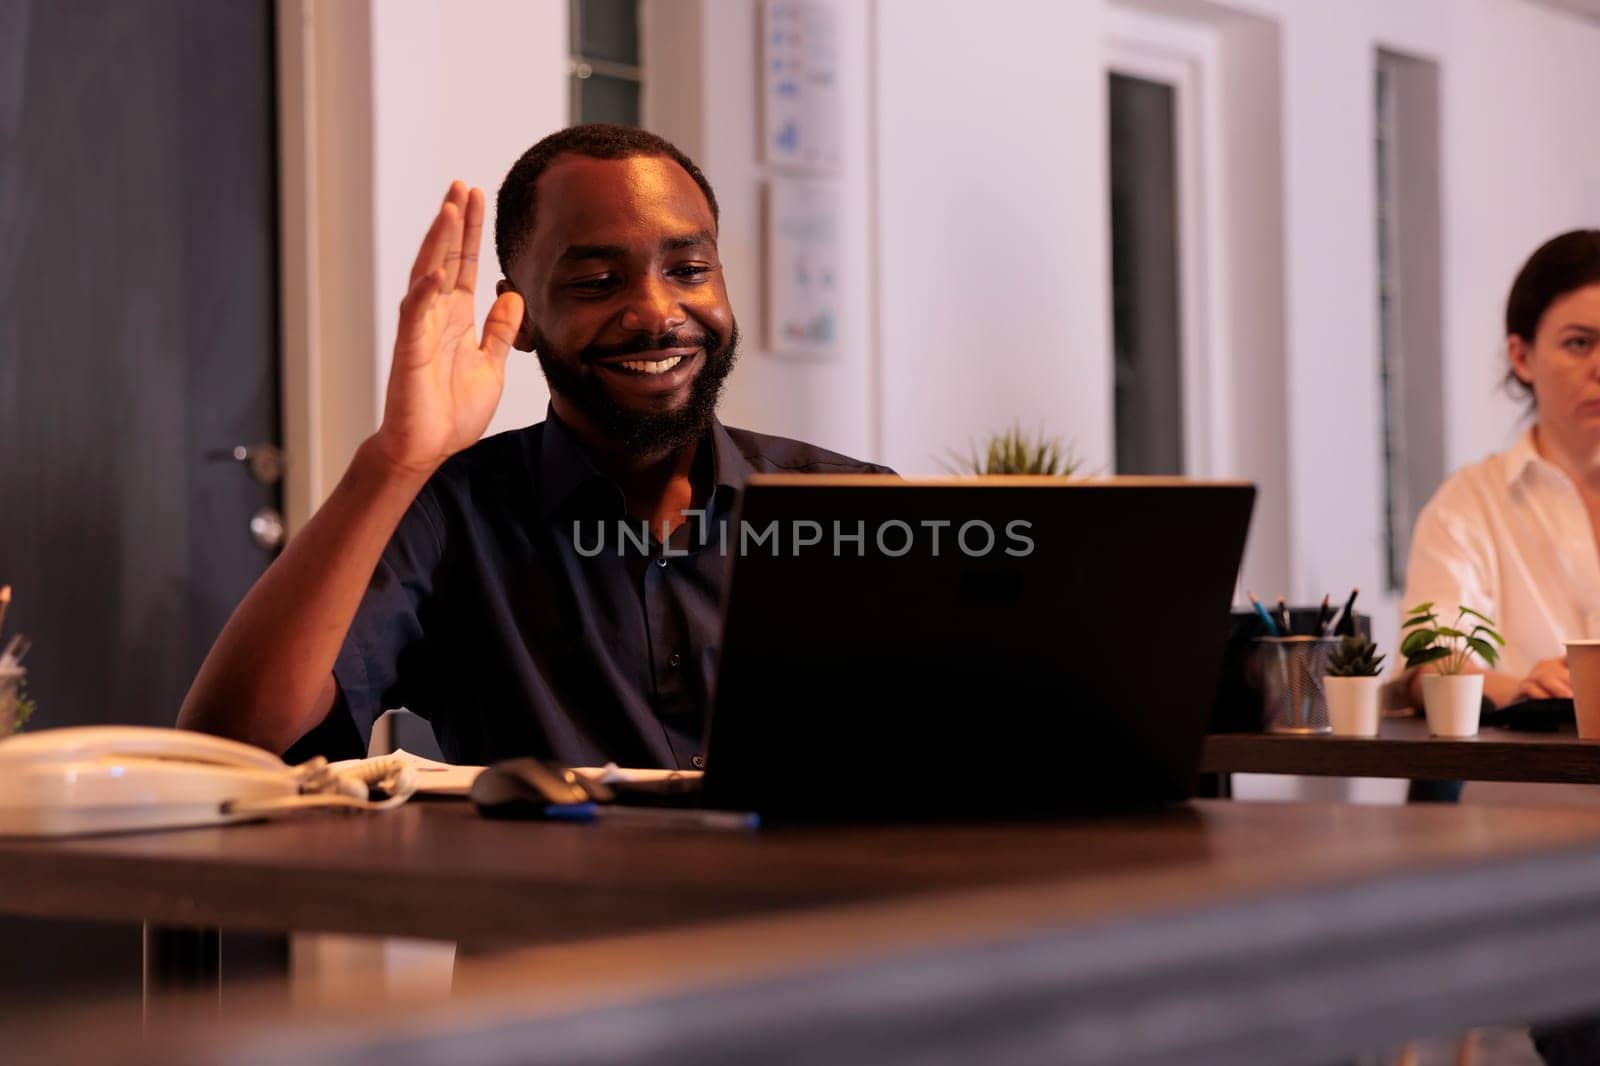 Smiling employee talking on videoconference with teamlead, waving hi, corporate worker answering teleconference call in office at night. African american man remote conversation in coworking space